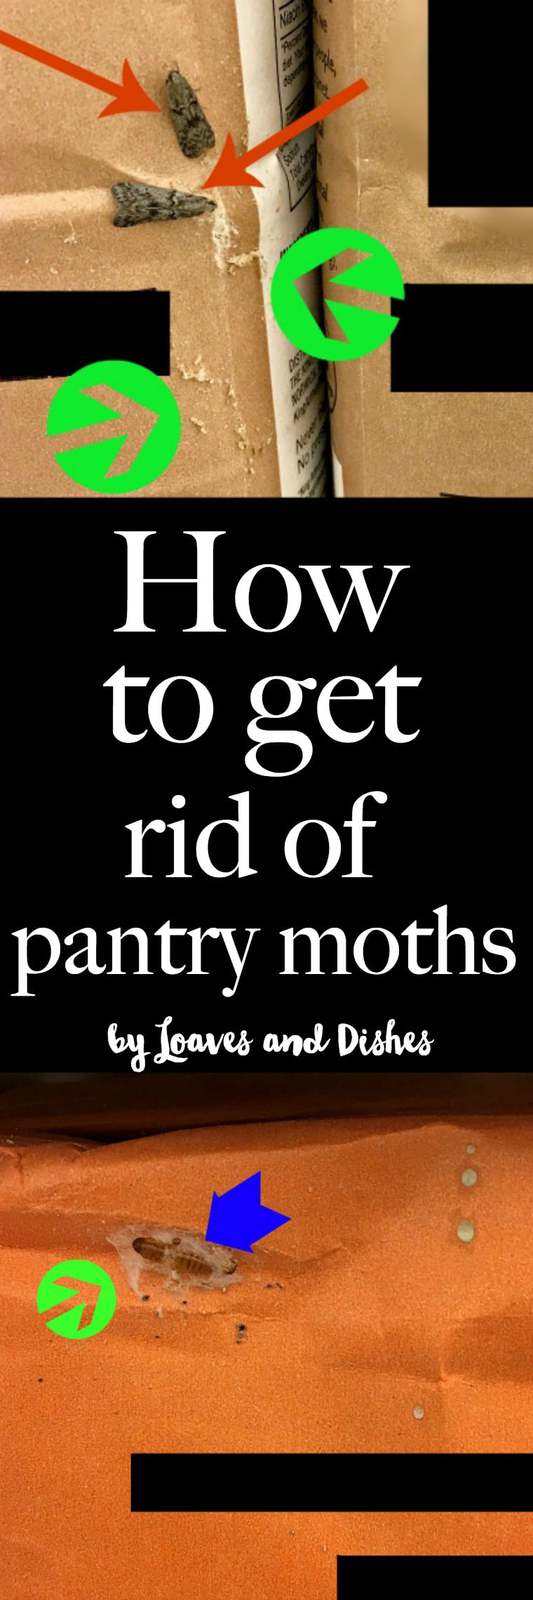 This post reflects how to get rid of and kill pantry moths. Pantry moths are insects that can infect your food. Use these helpful tips to avoid them and stop them. Home remedies are explained including bay leaves, homemade cleaner, traps, products and other